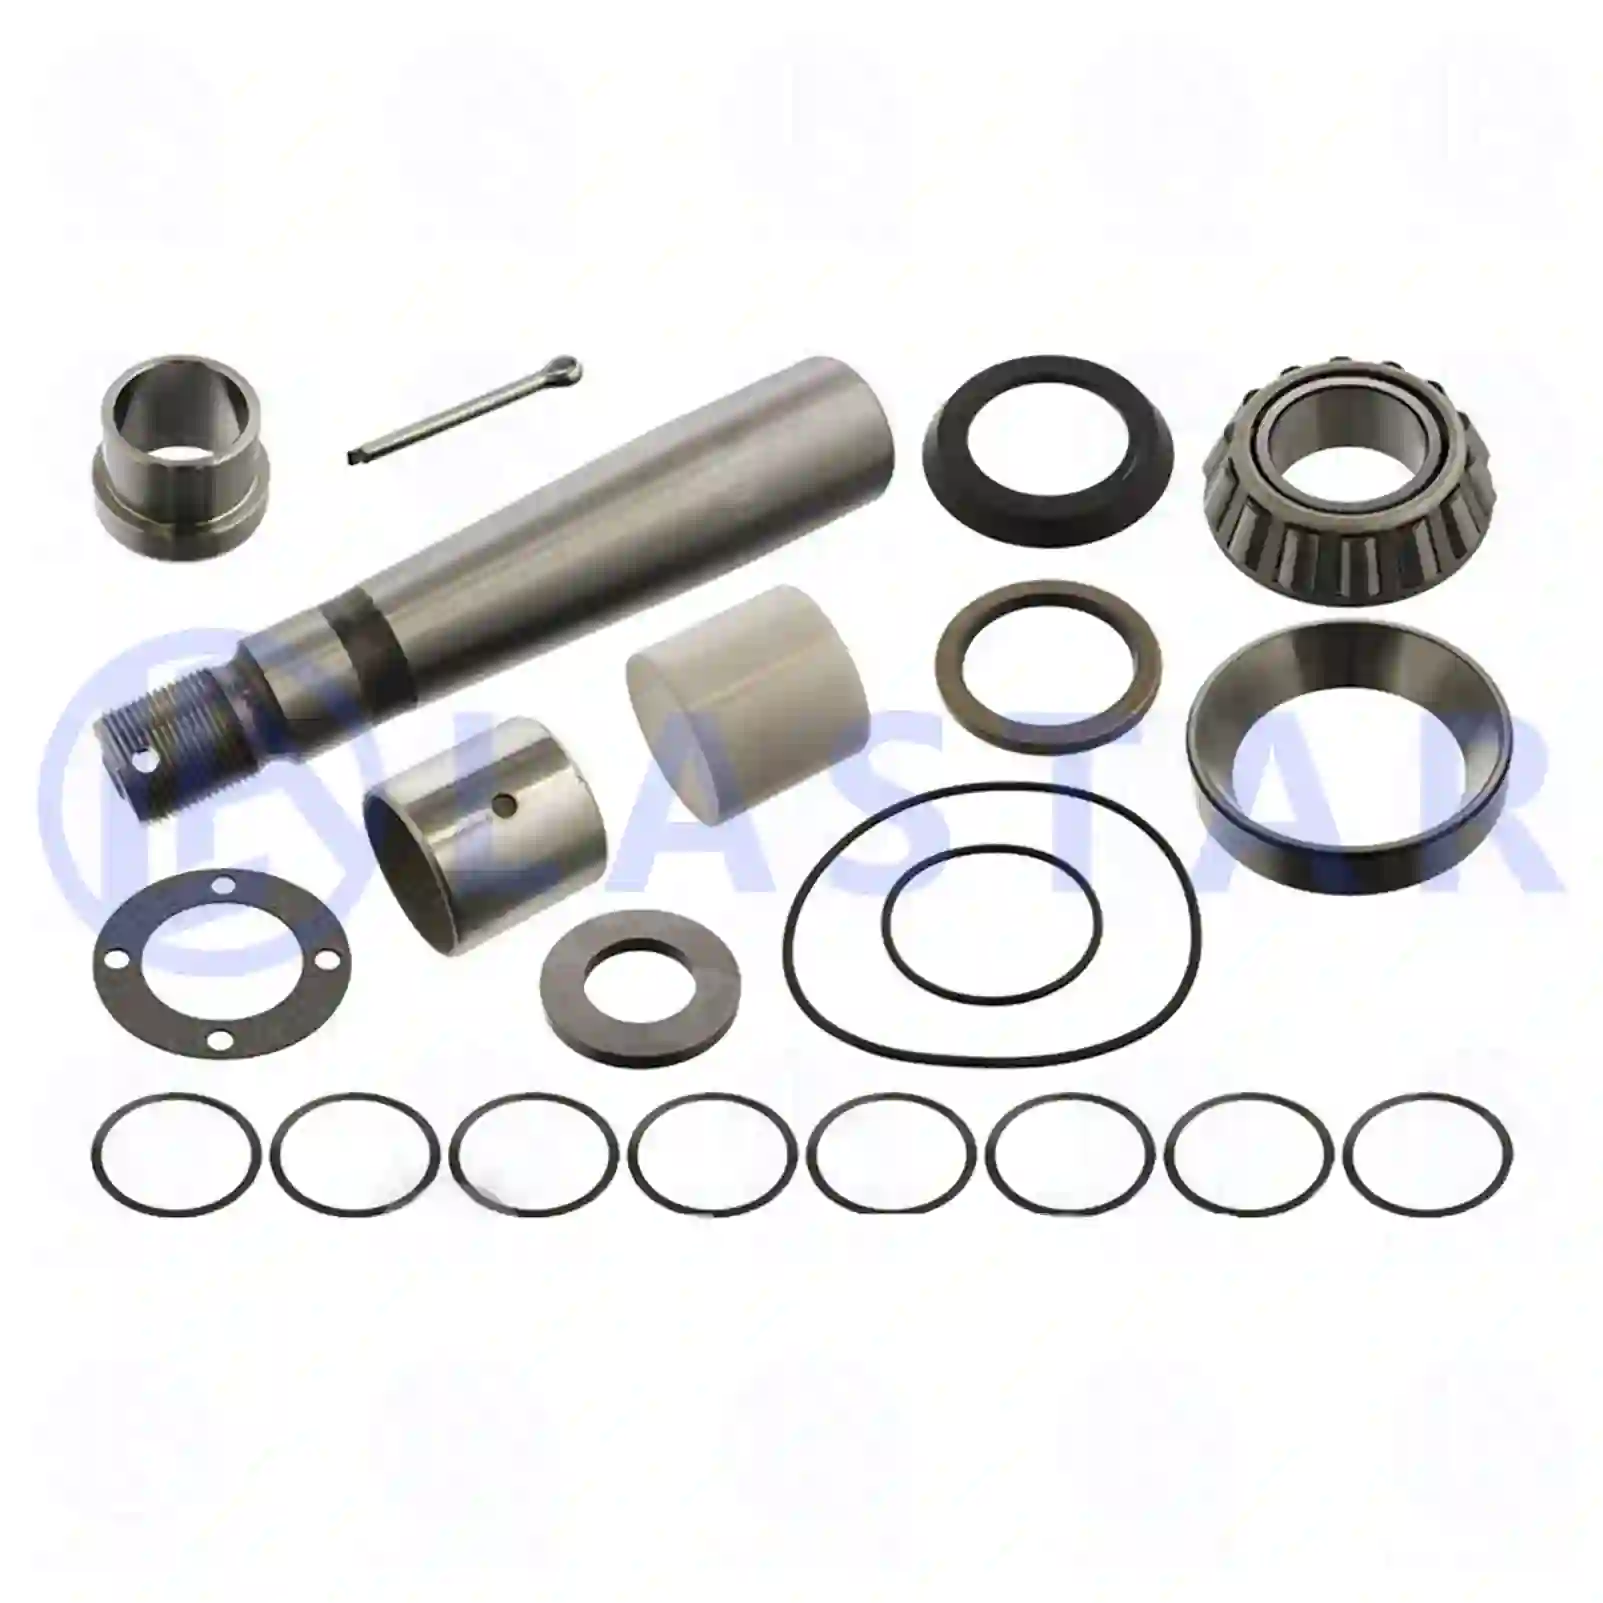 King pin kit, with bearing, 77731423, 271141S, 3090267S, , ||  77731423 Lastar Spare Part | Truck Spare Parts, Auotomotive Spare Parts King pin kit, with bearing, 77731423, 271141S, 3090267S, , ||  77731423 Lastar Spare Part | Truck Spare Parts, Auotomotive Spare Parts